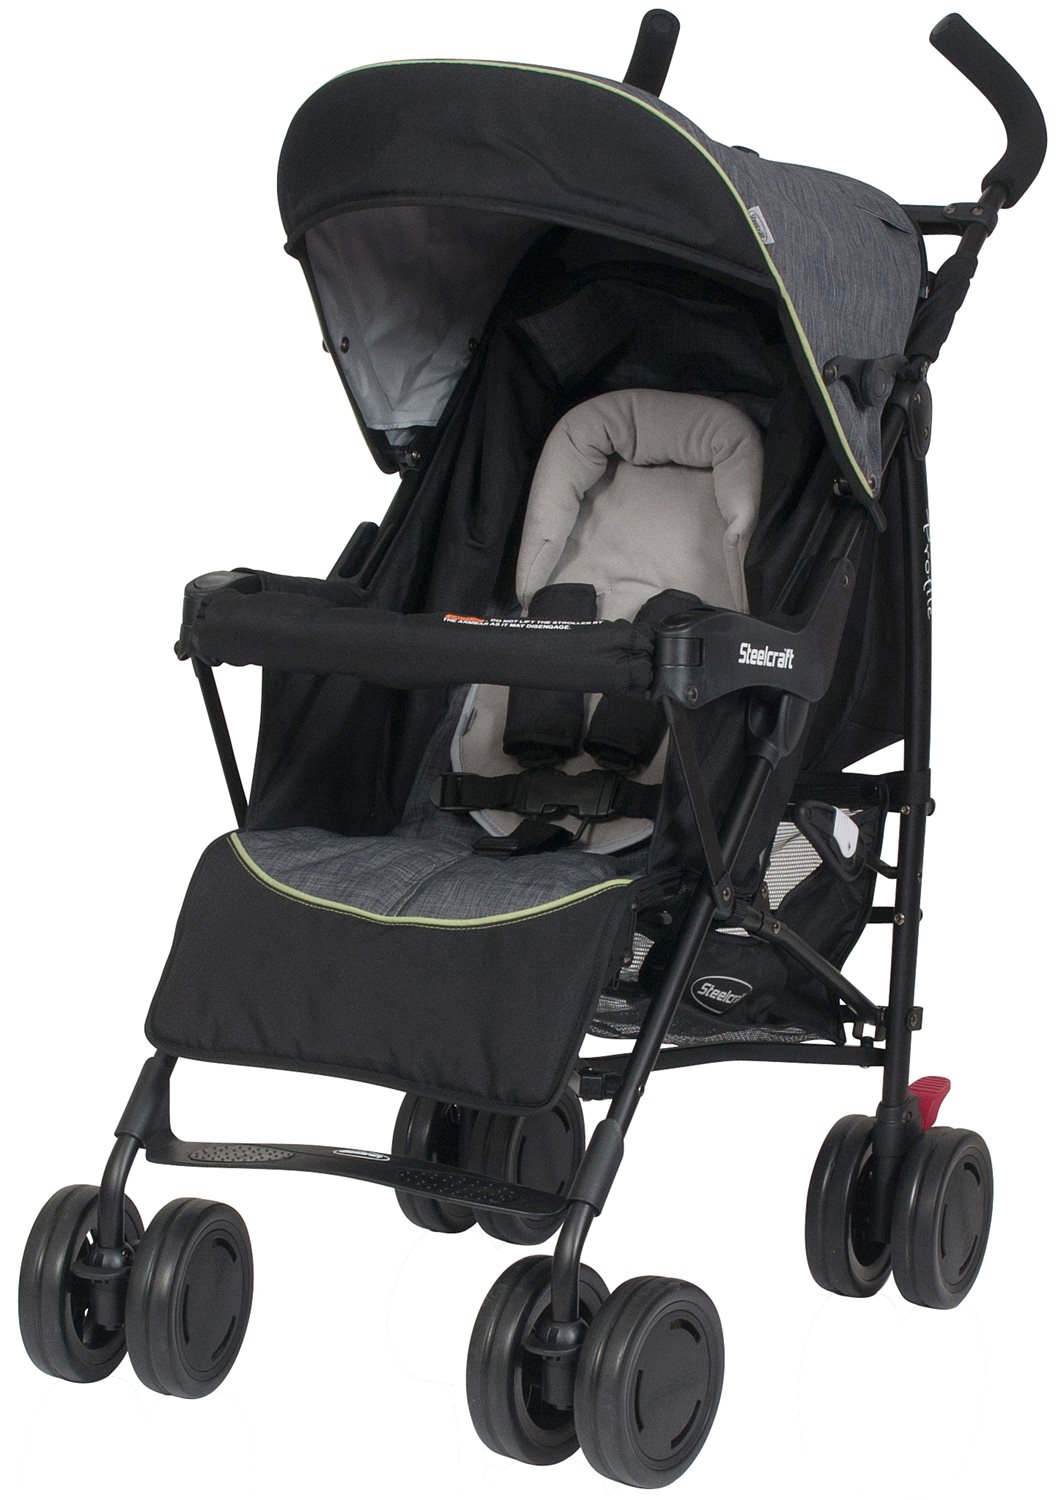 steelcraft buggy